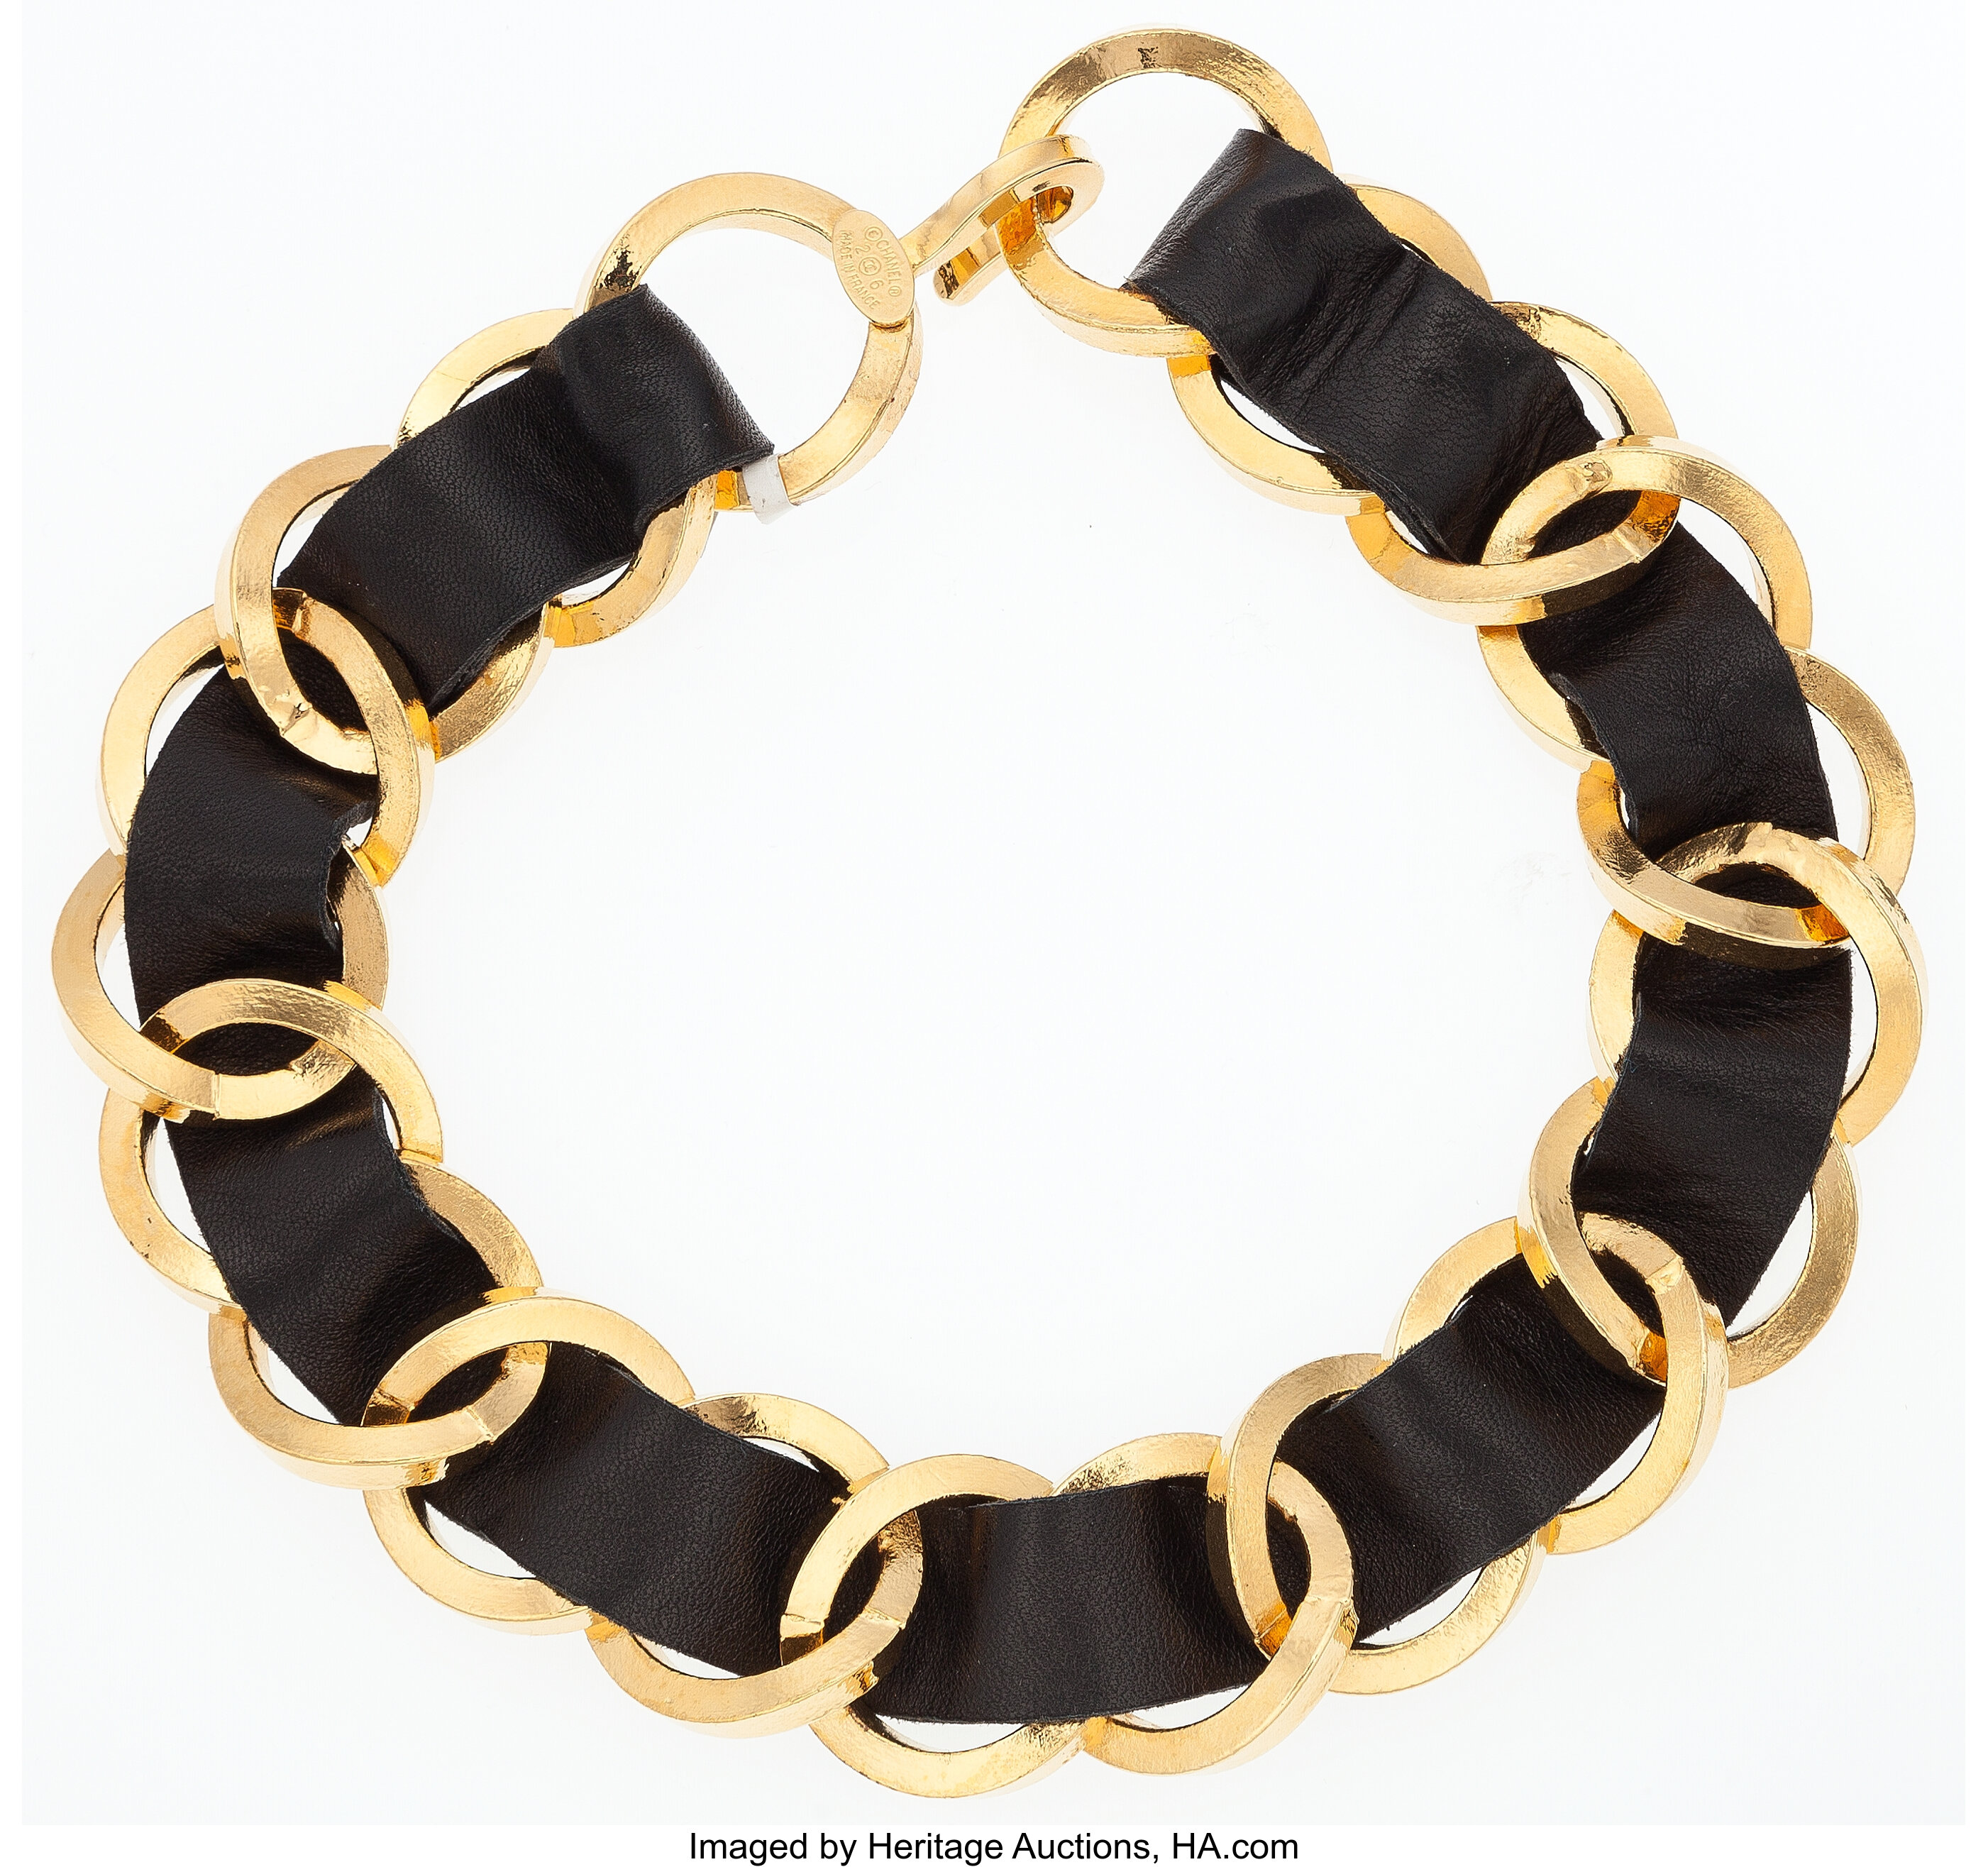 Chanel Black Lambskin Leather Necklace with Gold Hardware.